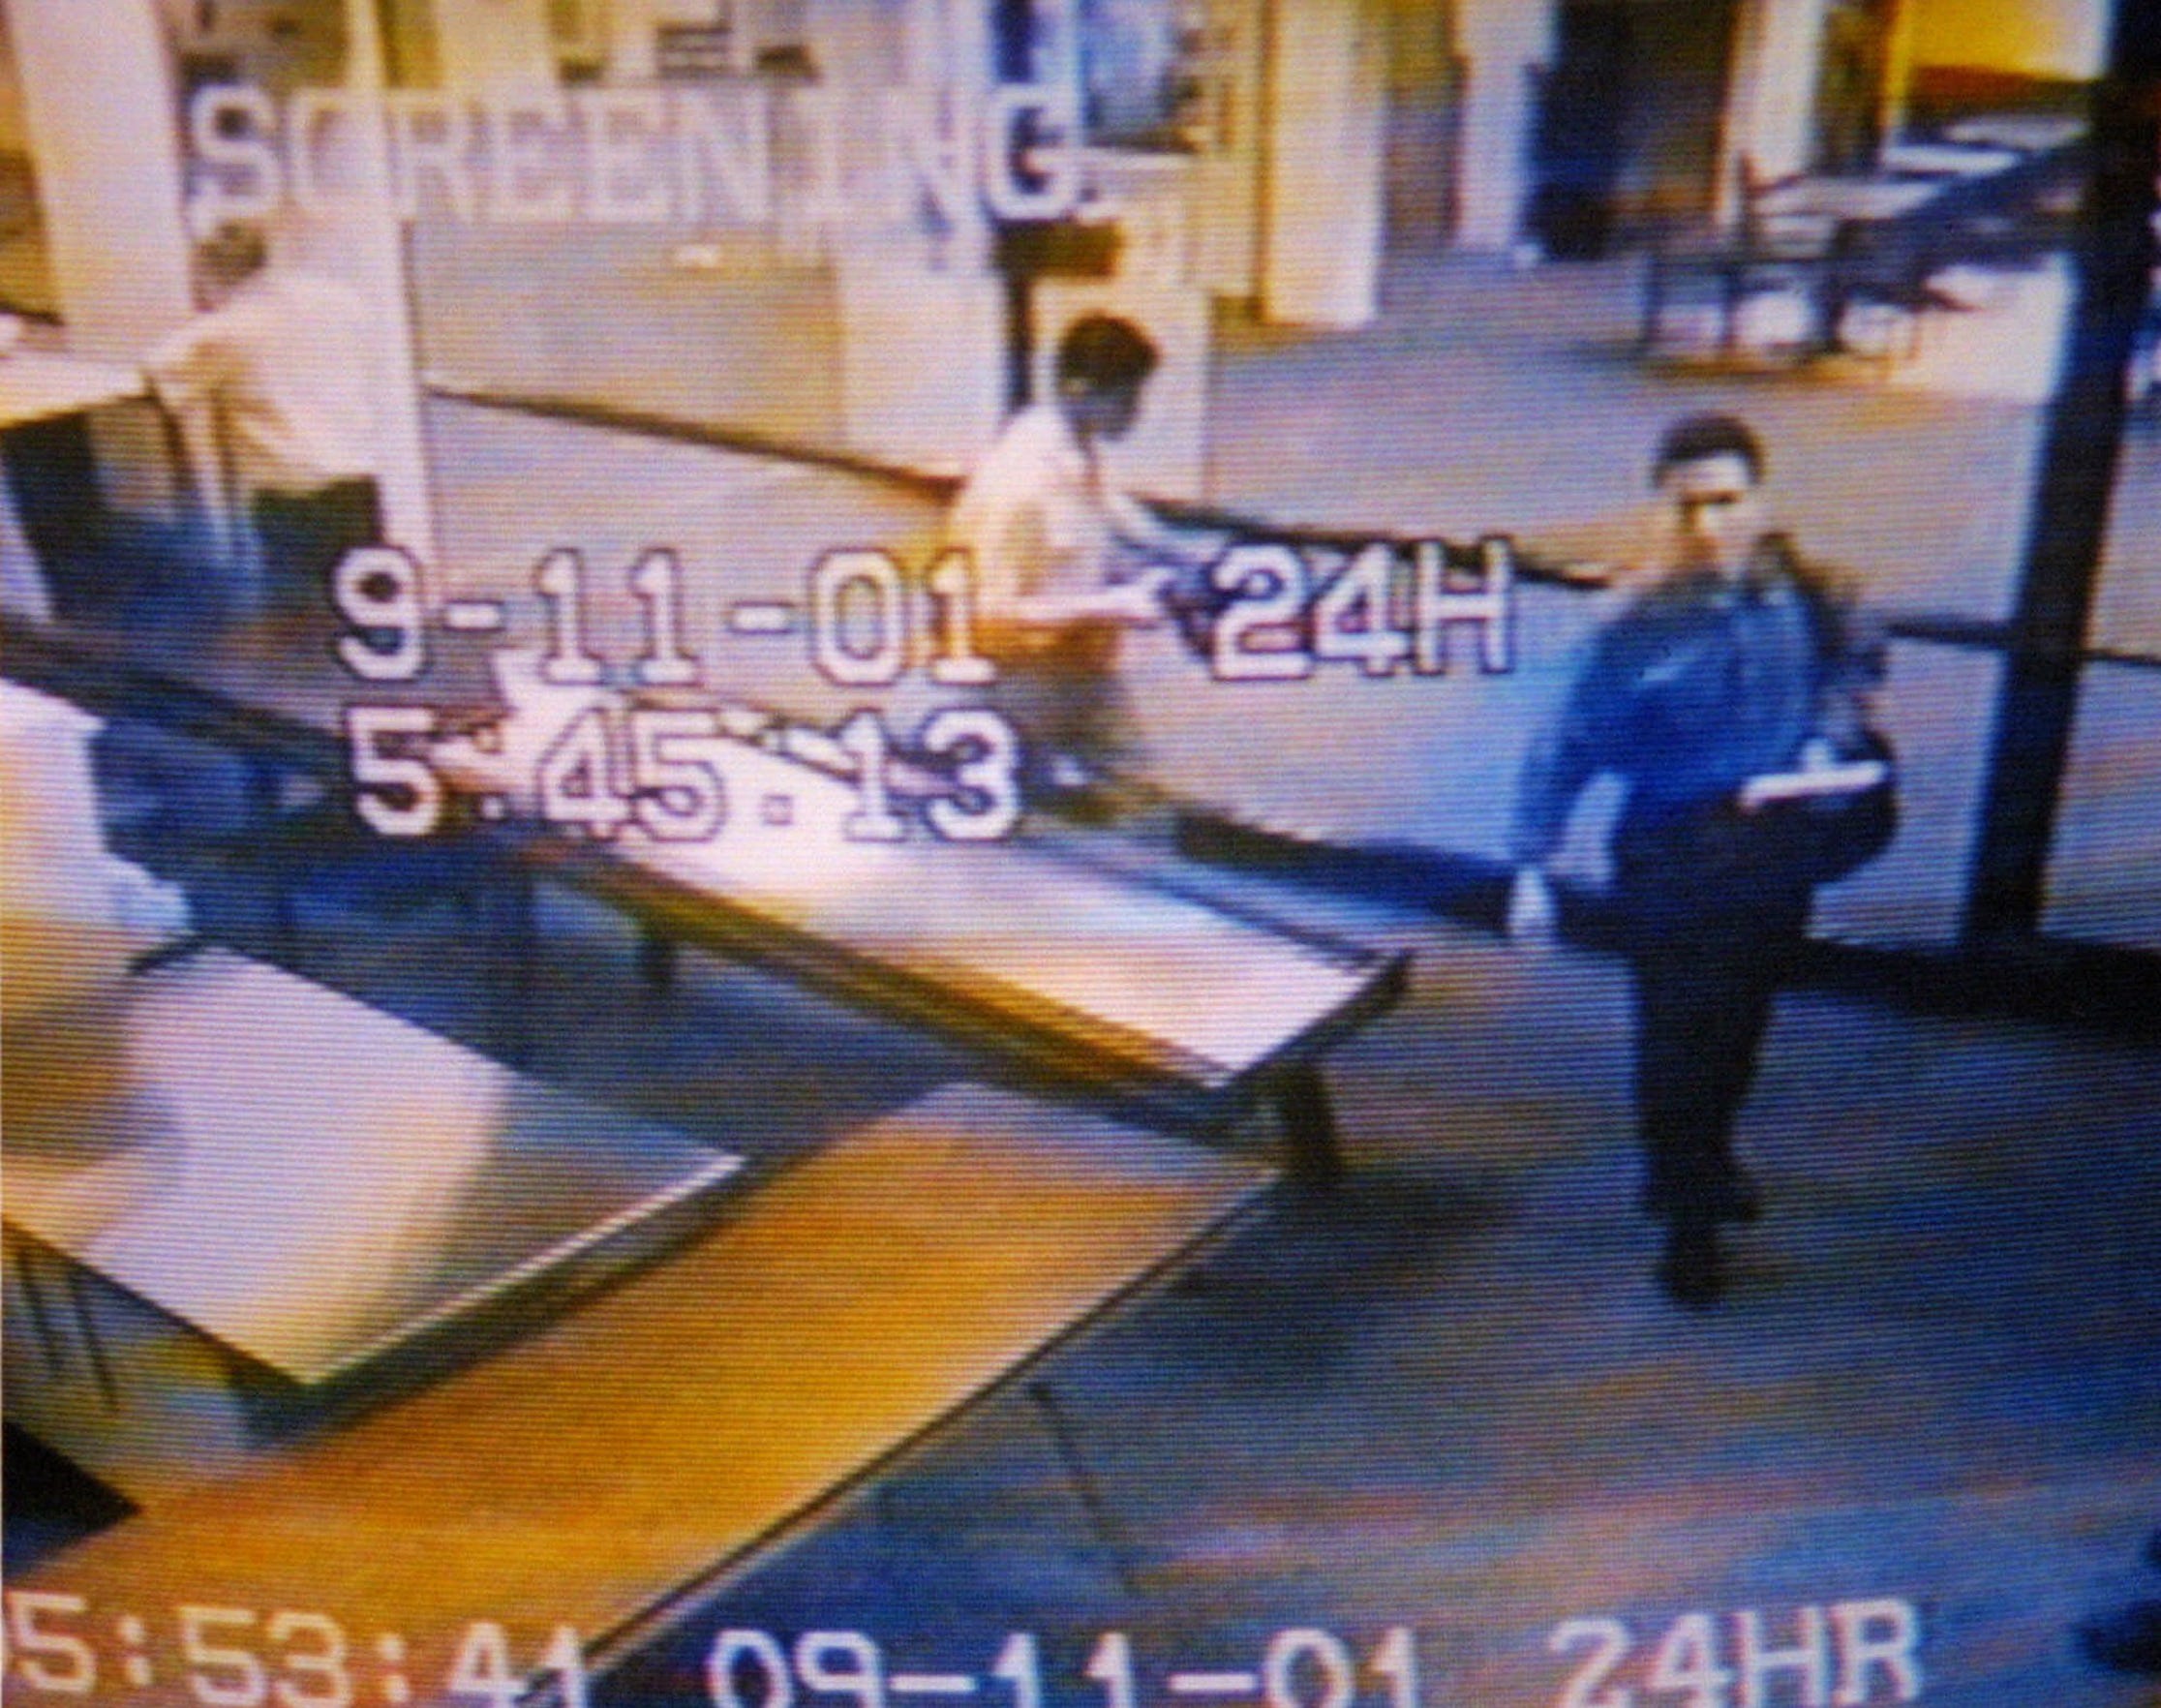 Two men, identified by authorities as suspected hijackers Mohamed Atta, right, and Abdulaziz Alomari, center, pass through airport security, Tuesday, Sept. 11, 2001 at Portland International Jetport in this photo from the airport surveillance tape released Wednesday, Sept. 19, 2001. Authorities say the two men took a commuter flight to Boston before boarding American Airlines Flight 11 which was one of four jetliners hijacked Sept. 11, 2001, and one of two which were crashed into the World Trade Center.